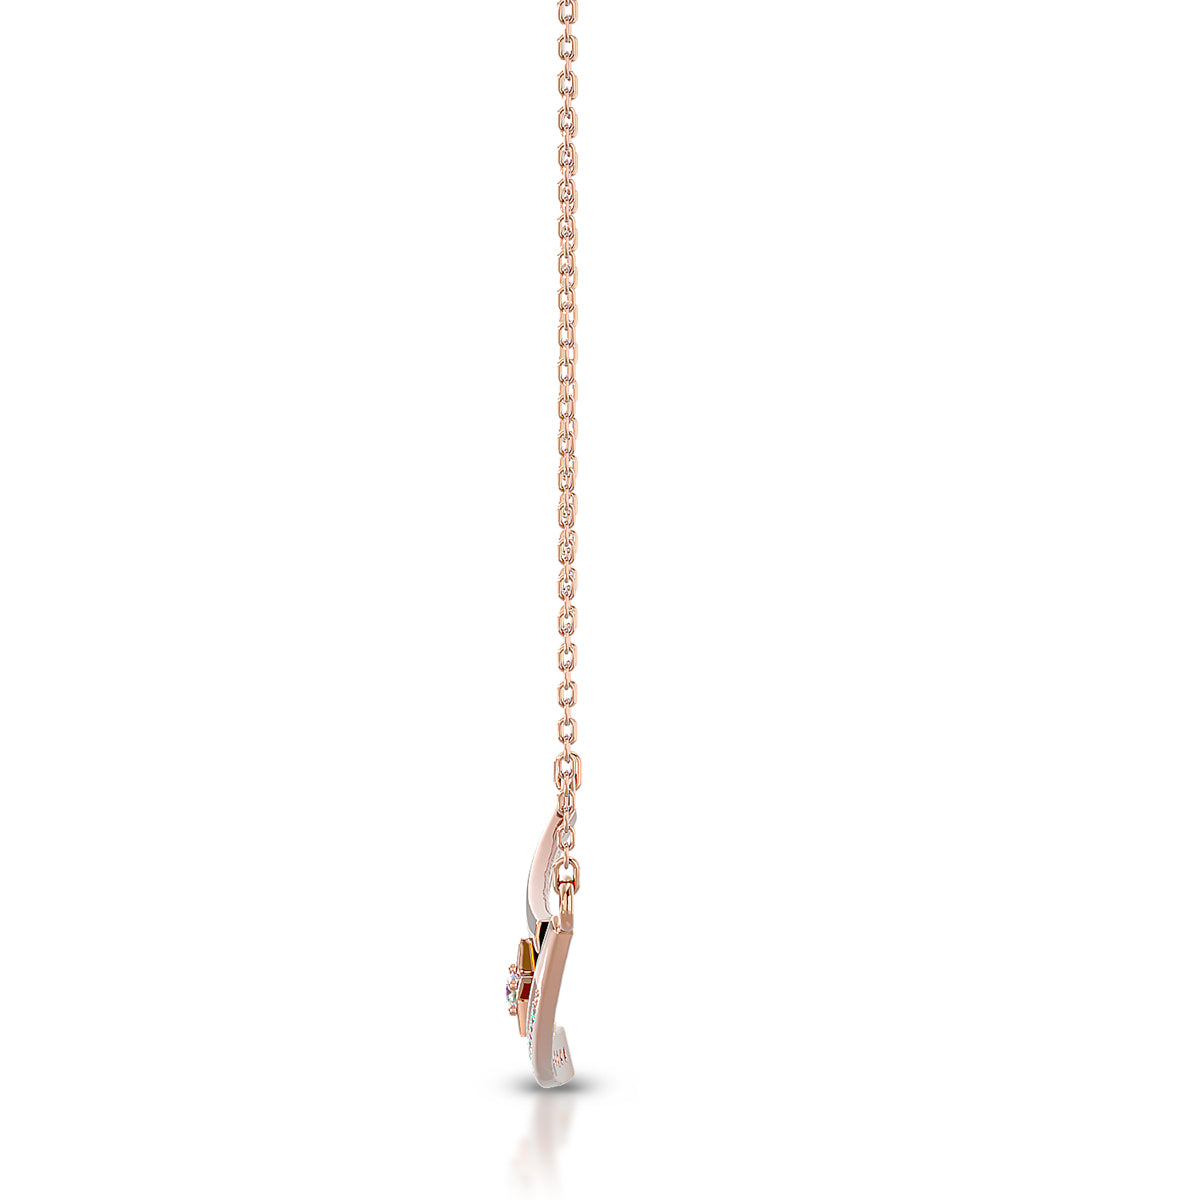 Adventure Necklace 18K Rose Gold With Diamonds